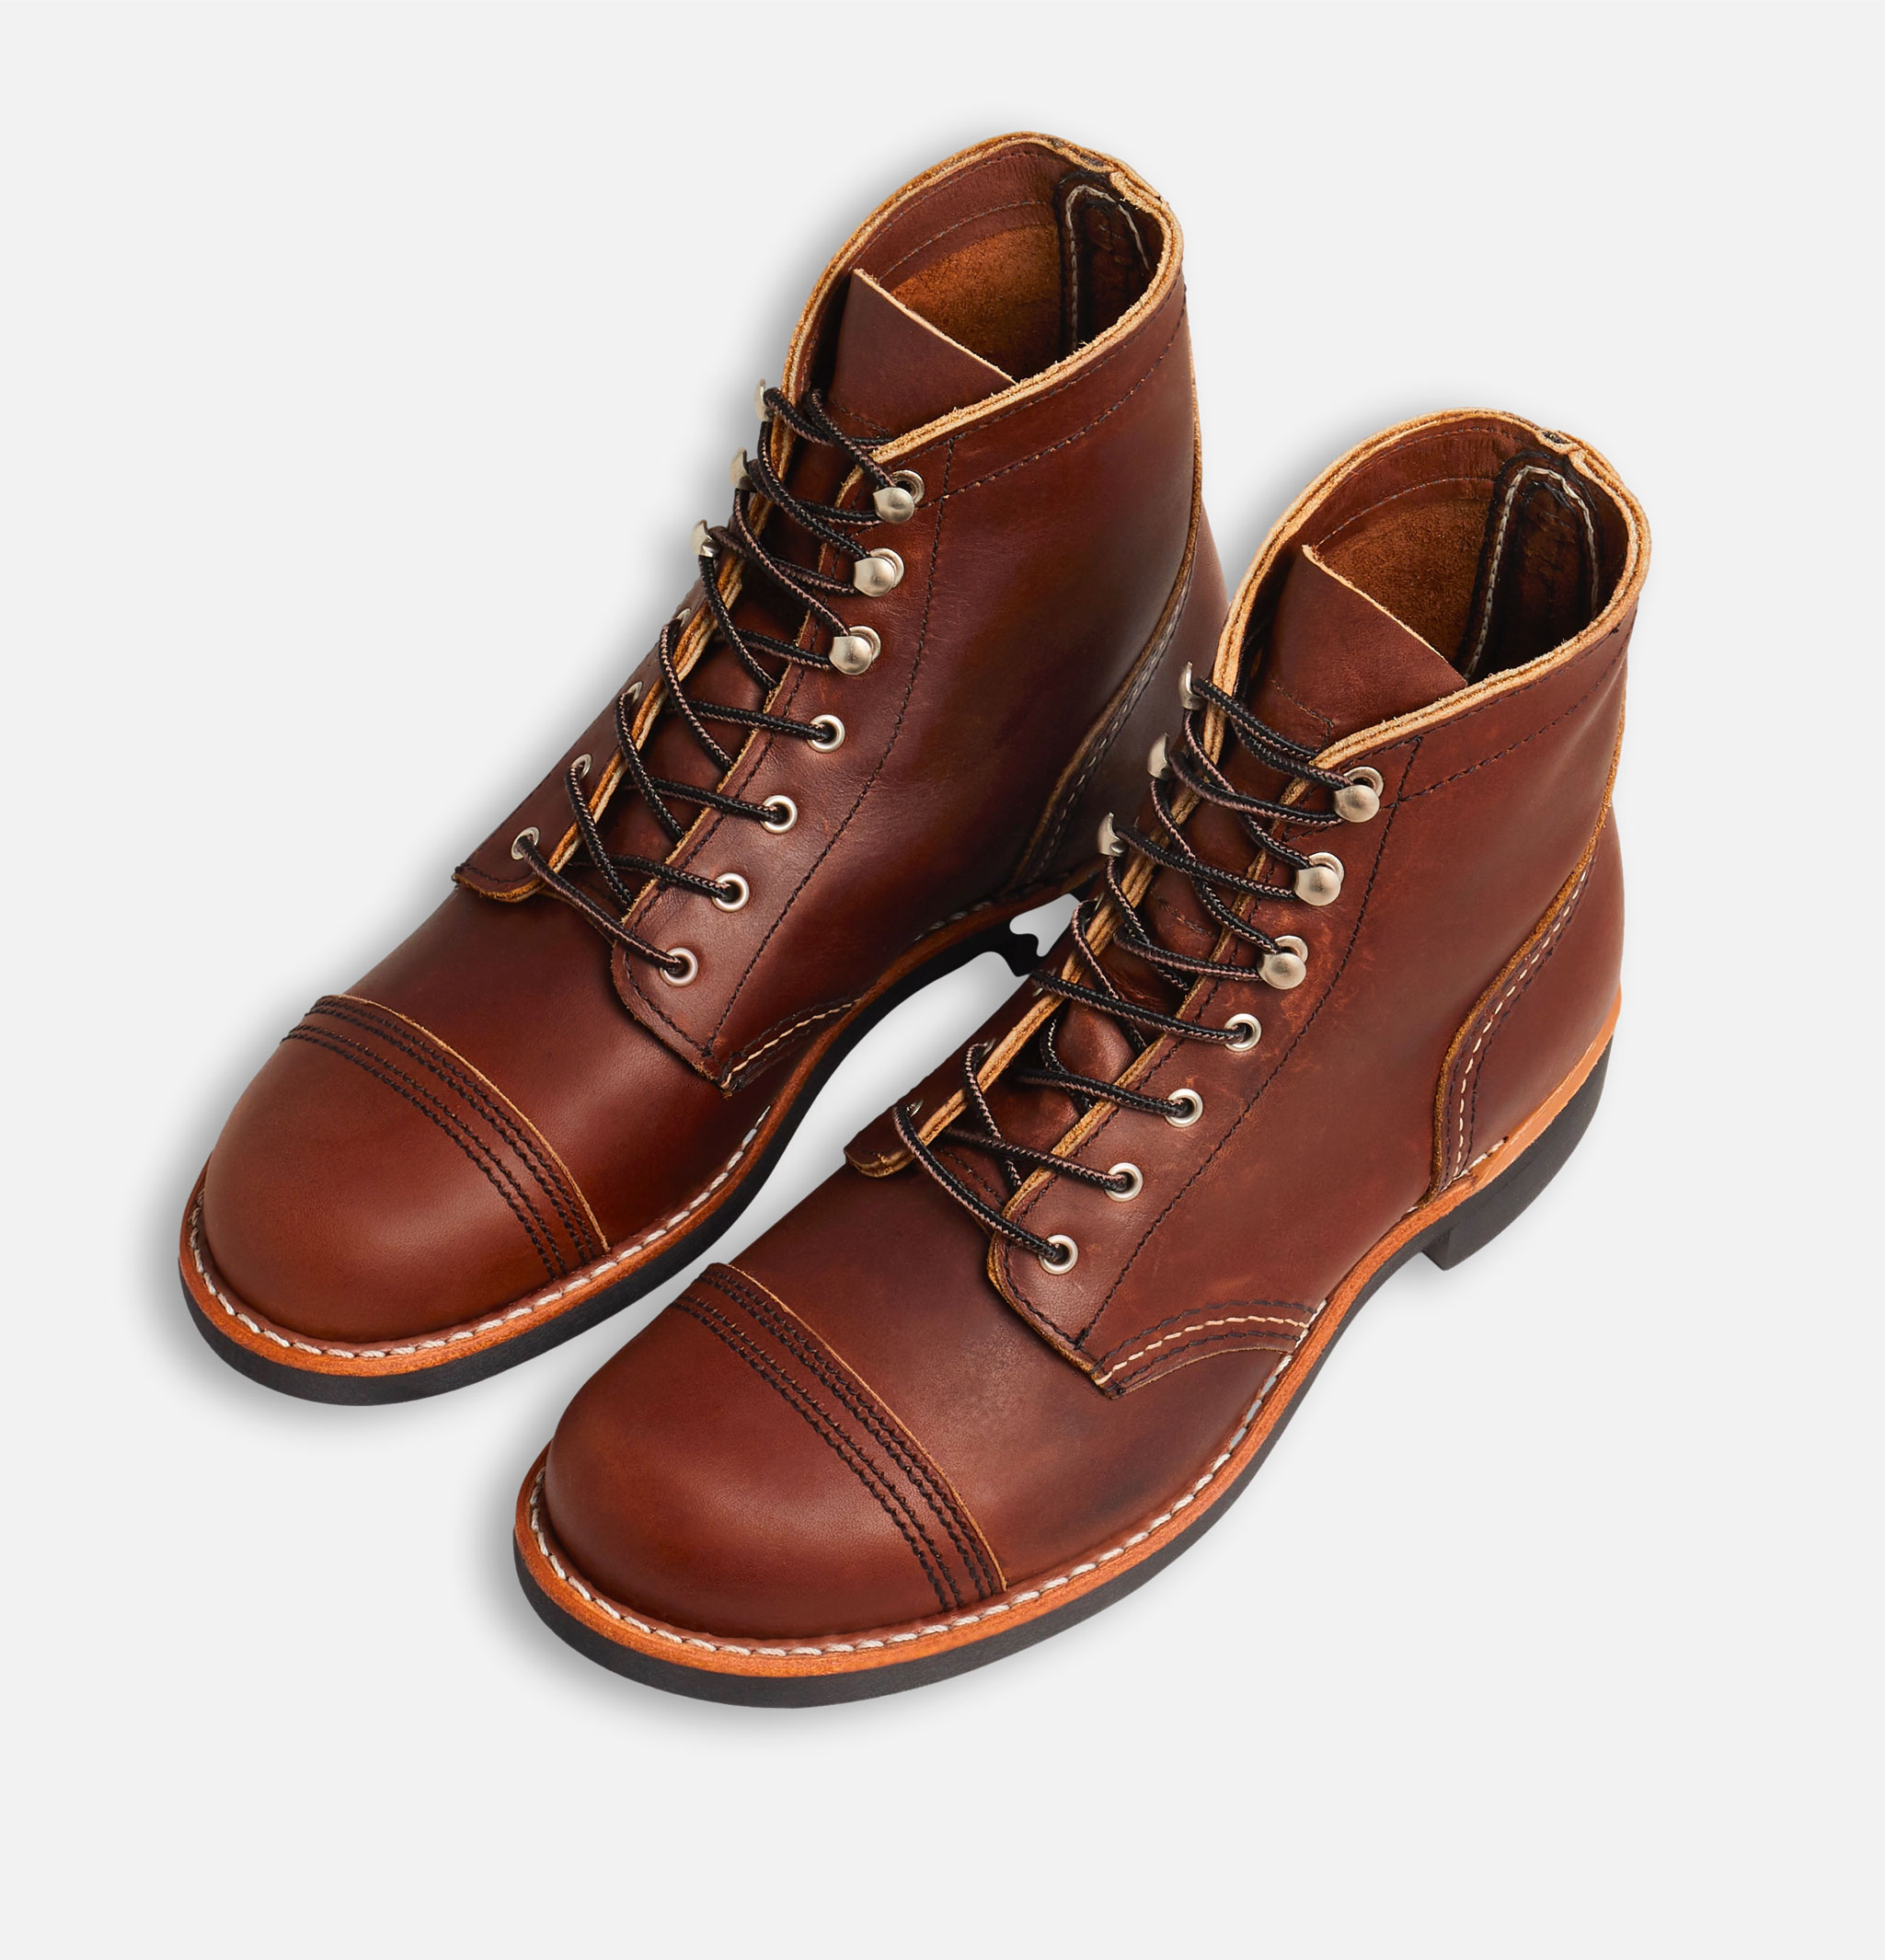 Red Wing Shoes Woman - 3365 - Iron Ranger Amber